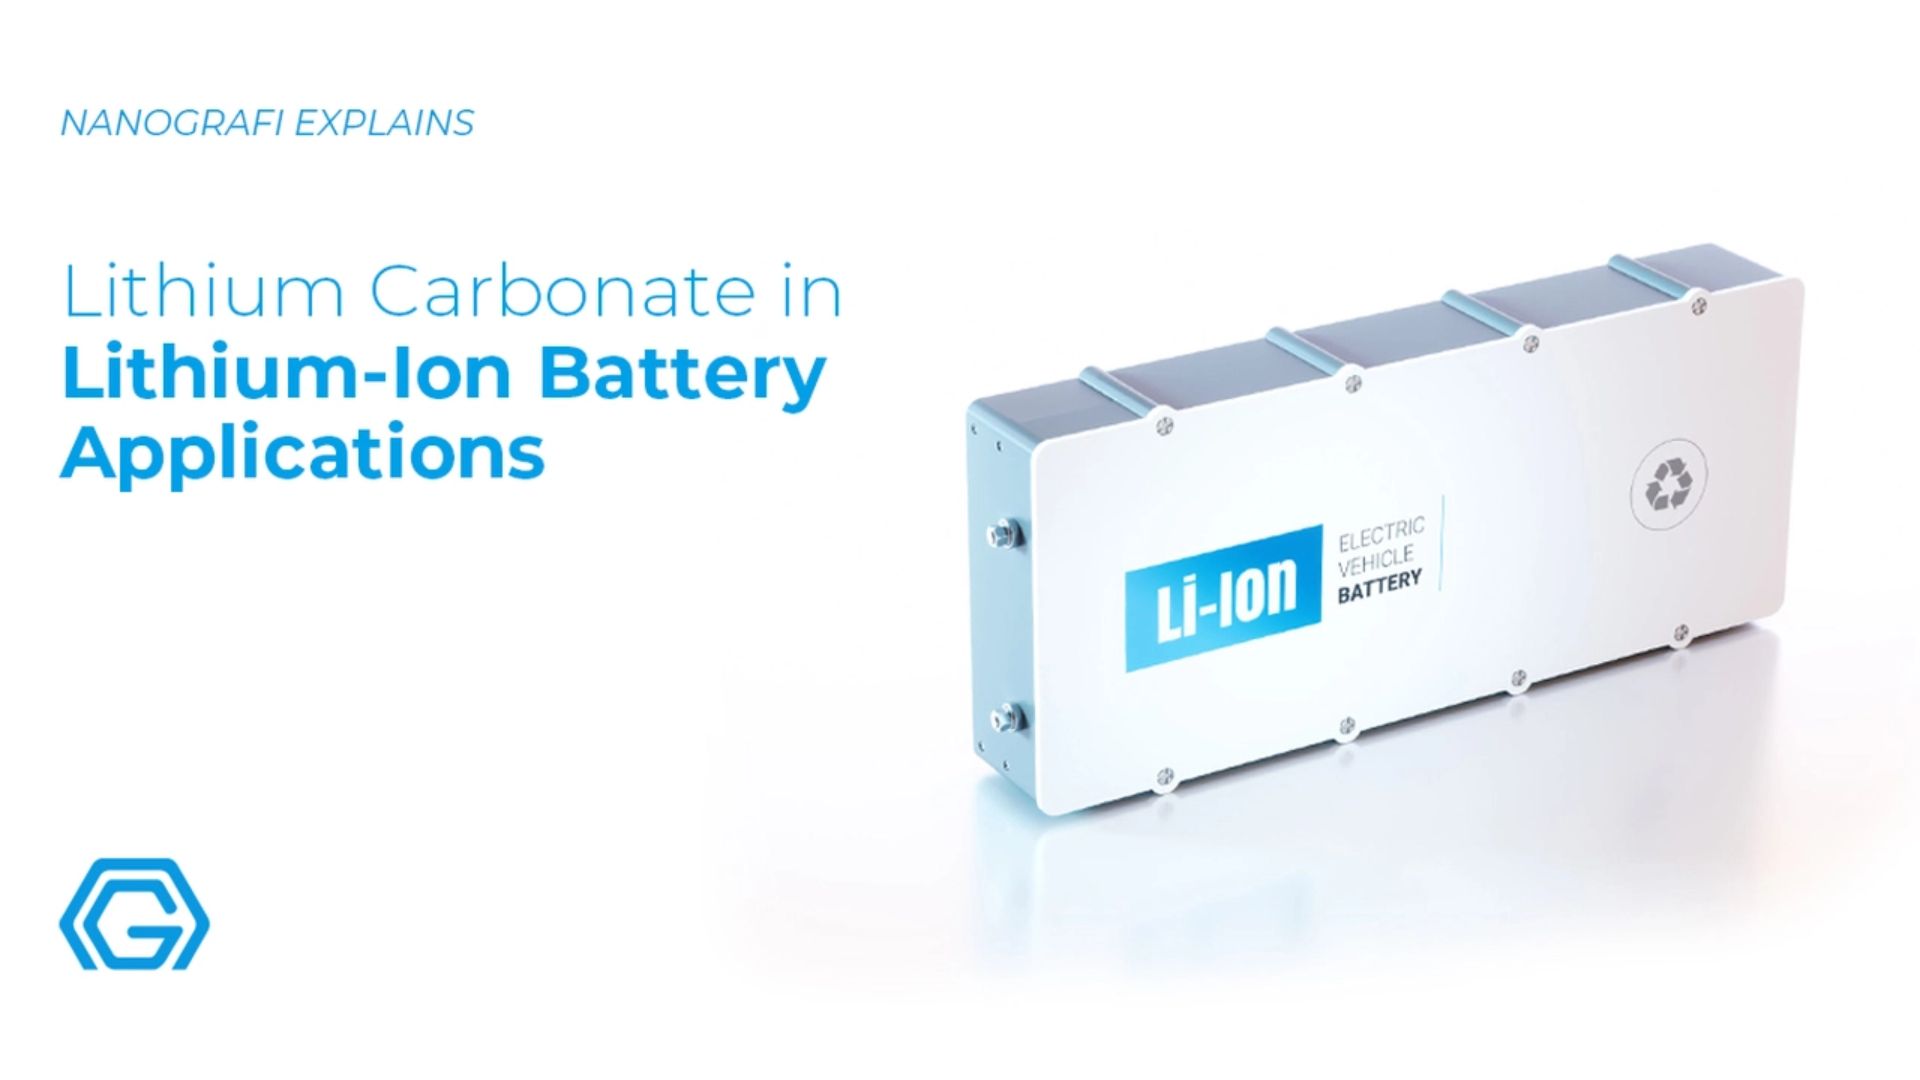 Lithium Carbonate in Lithium-Ion Battery Applications